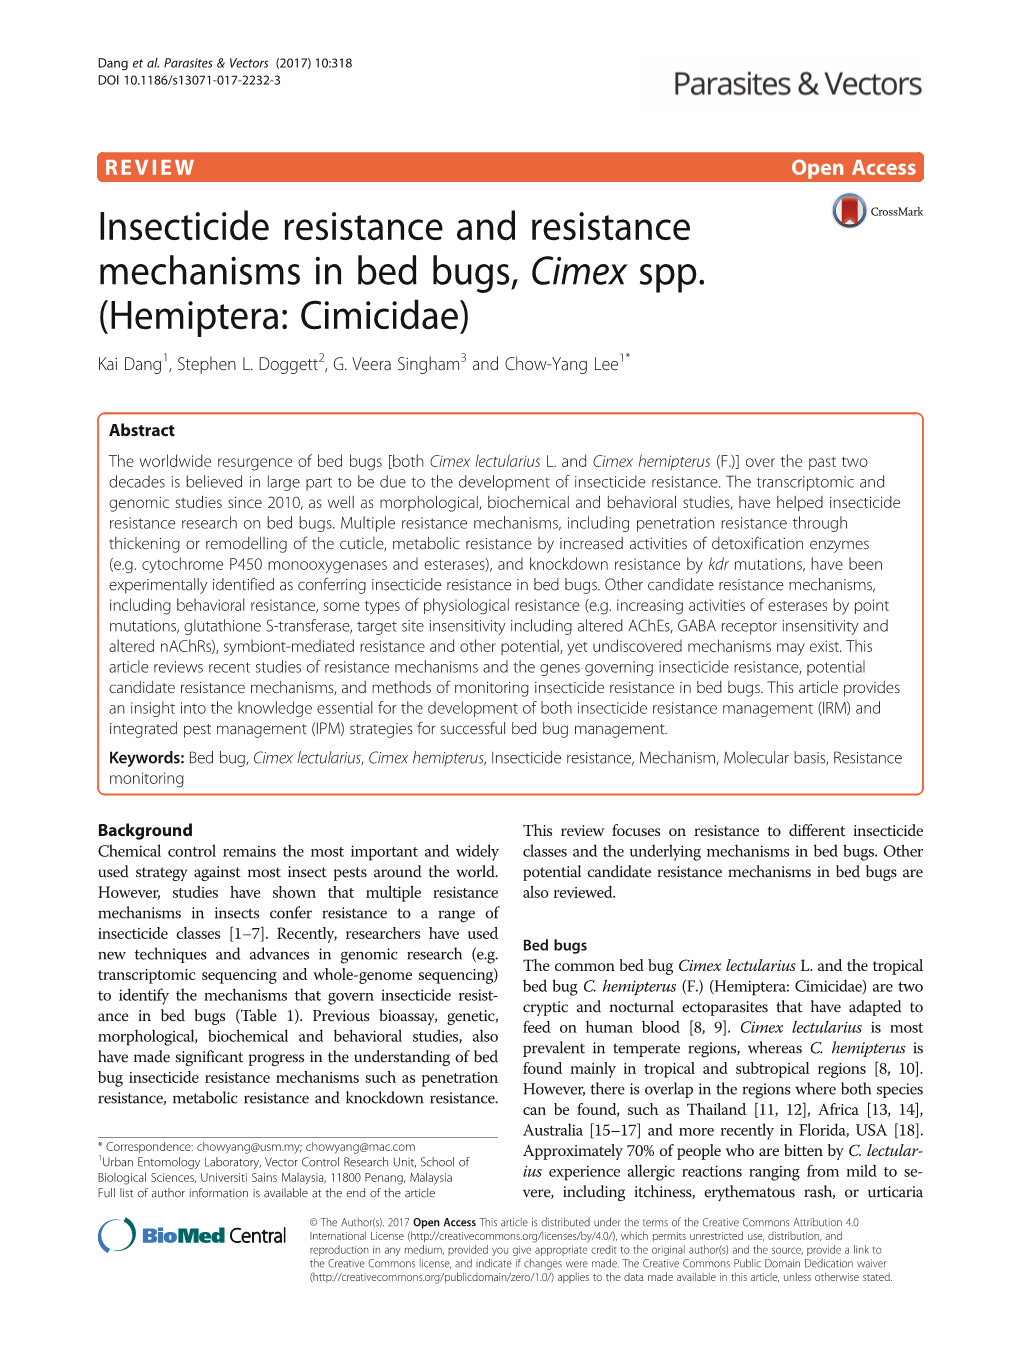 Insecticide Resistance and Resistance Mechanisms in Bed Bugs, Cimex Spp. (Hemiptera: Cimicidae) Kai Dang1, Stephen L